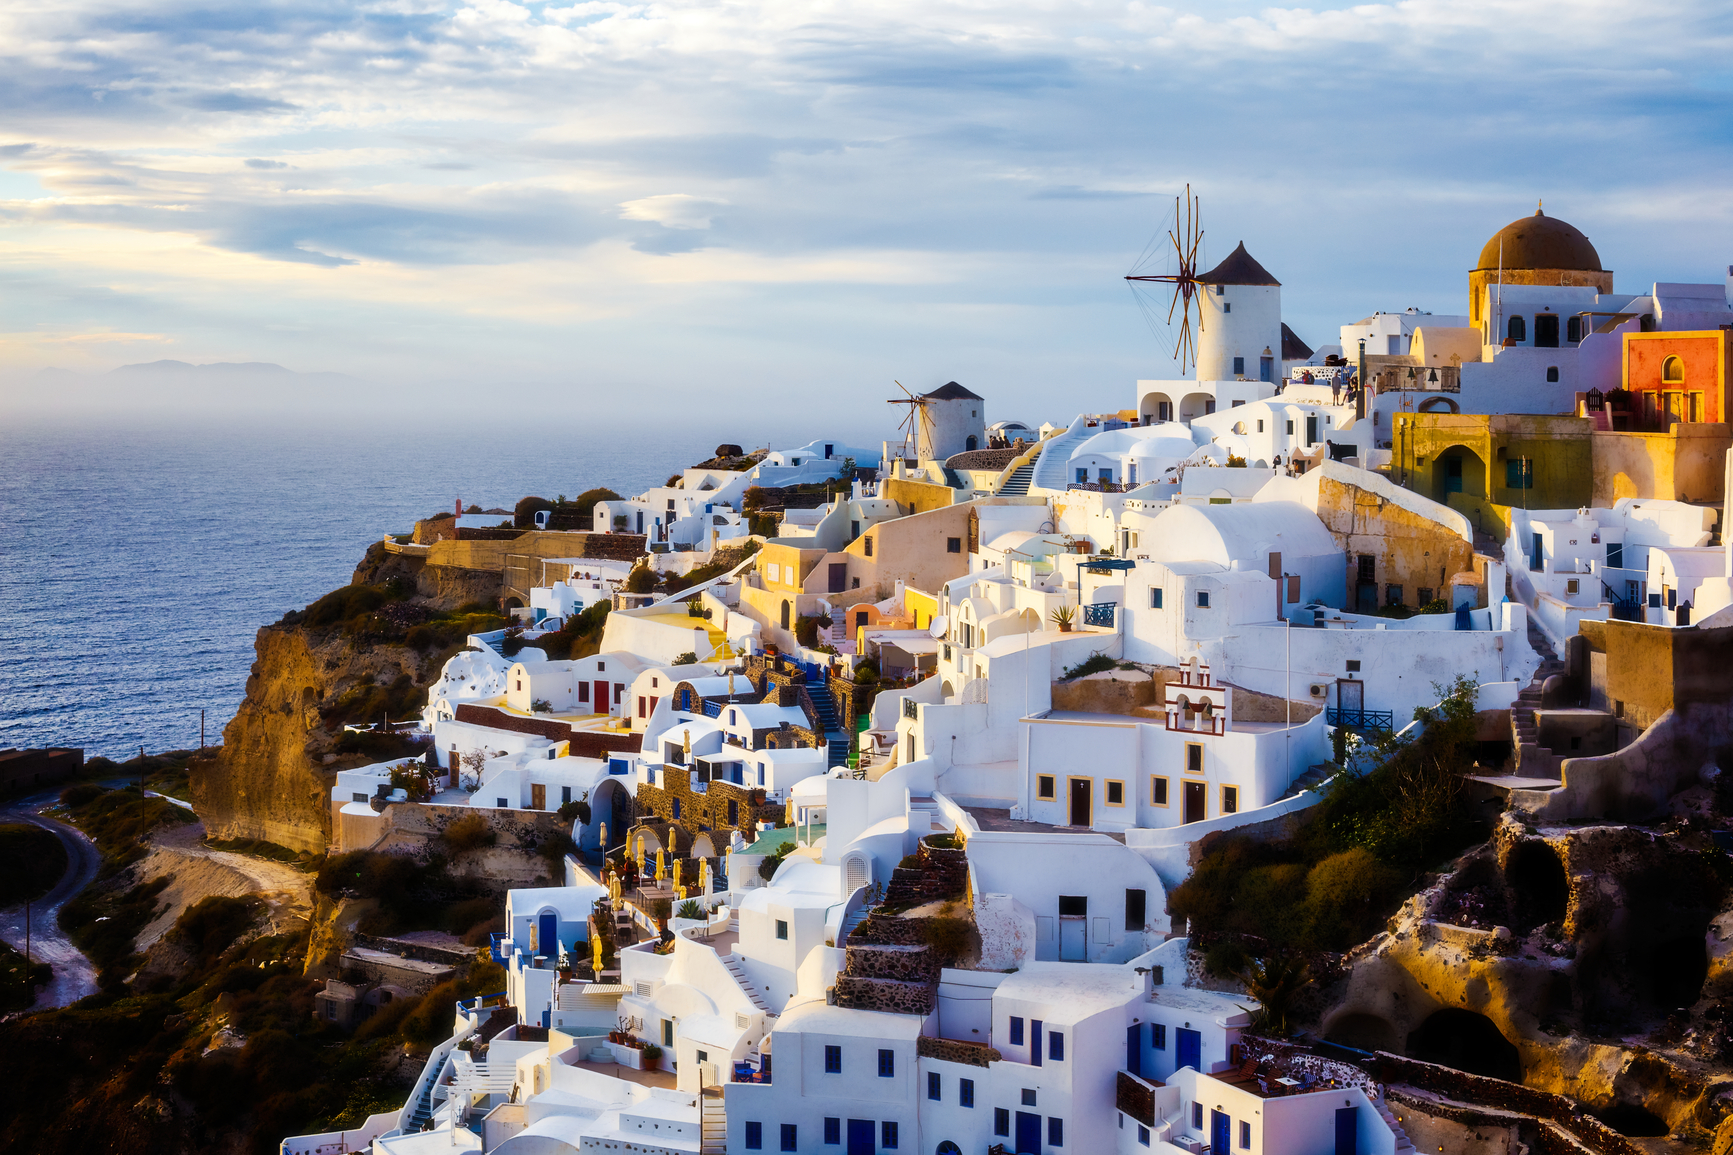 The beautiful traditional village of Oia, as it appears in the afternoon light,